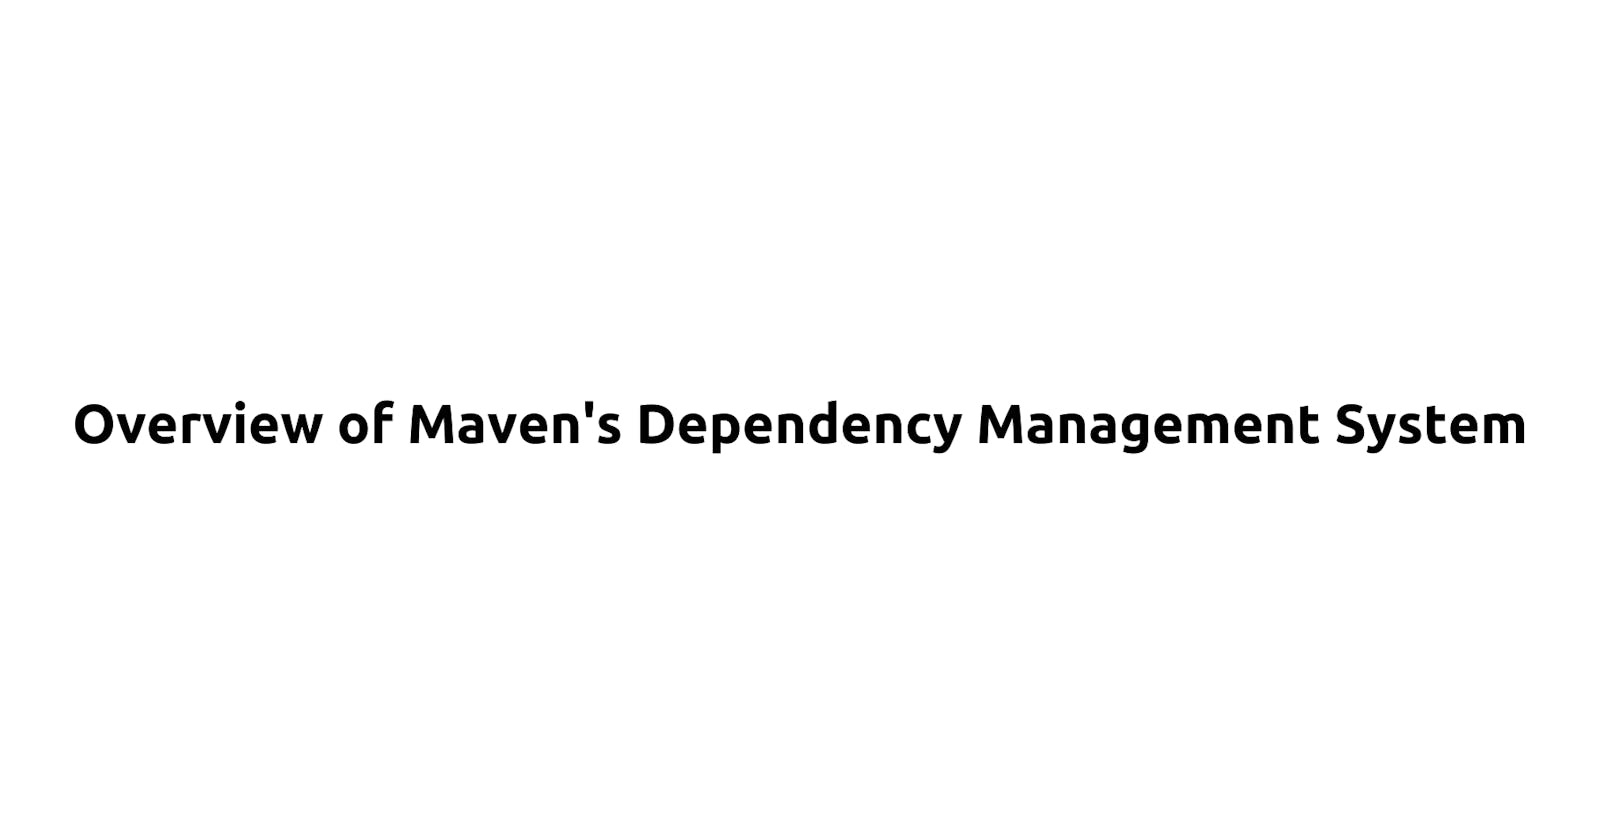 Overview of Maven's Dependency Management System